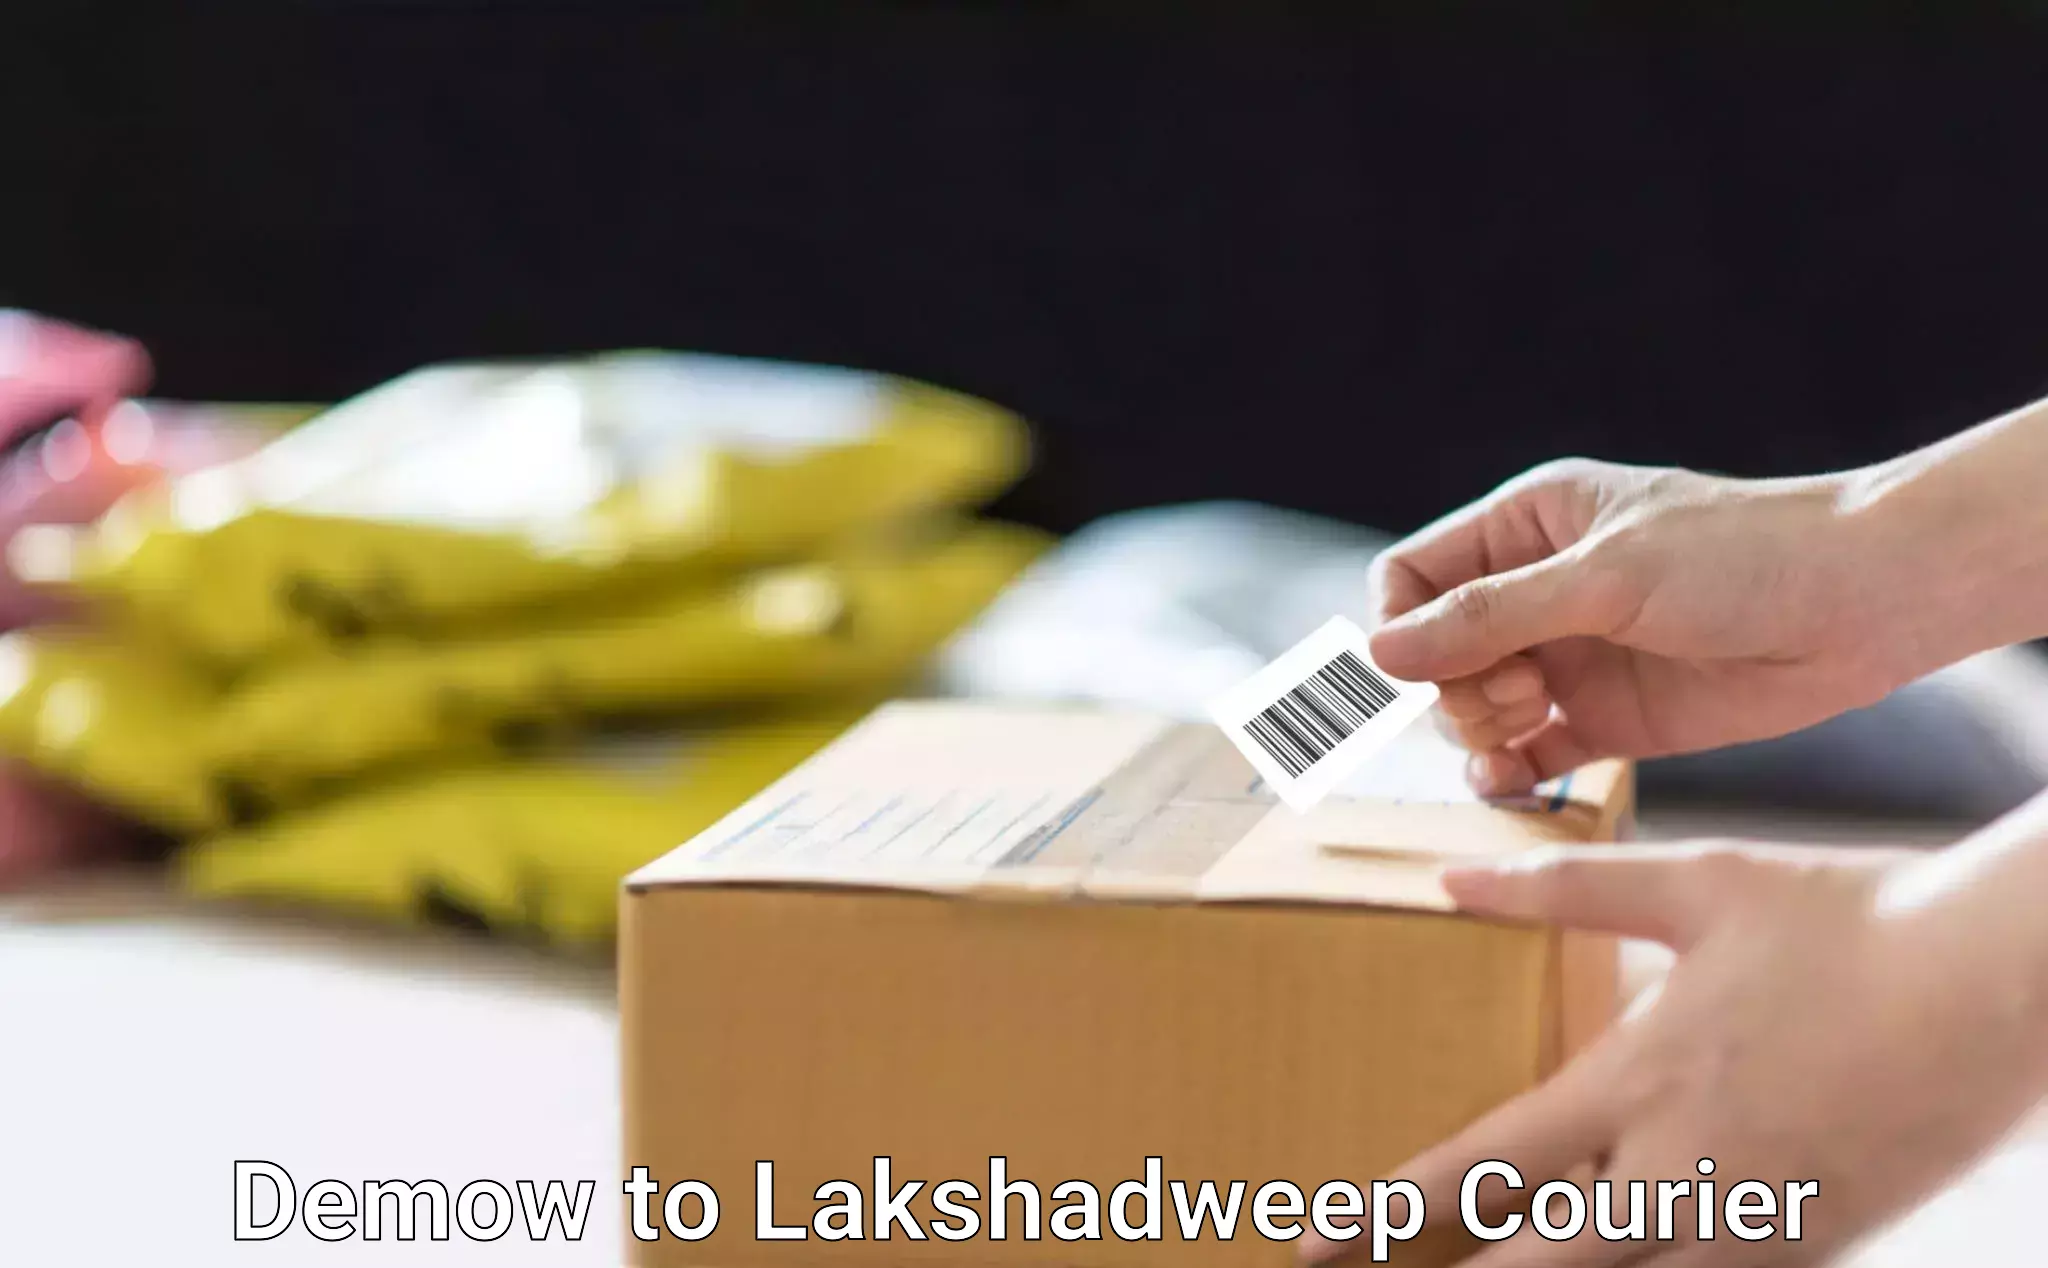 Cost-effective courier solutions Demow to Lakshadweep